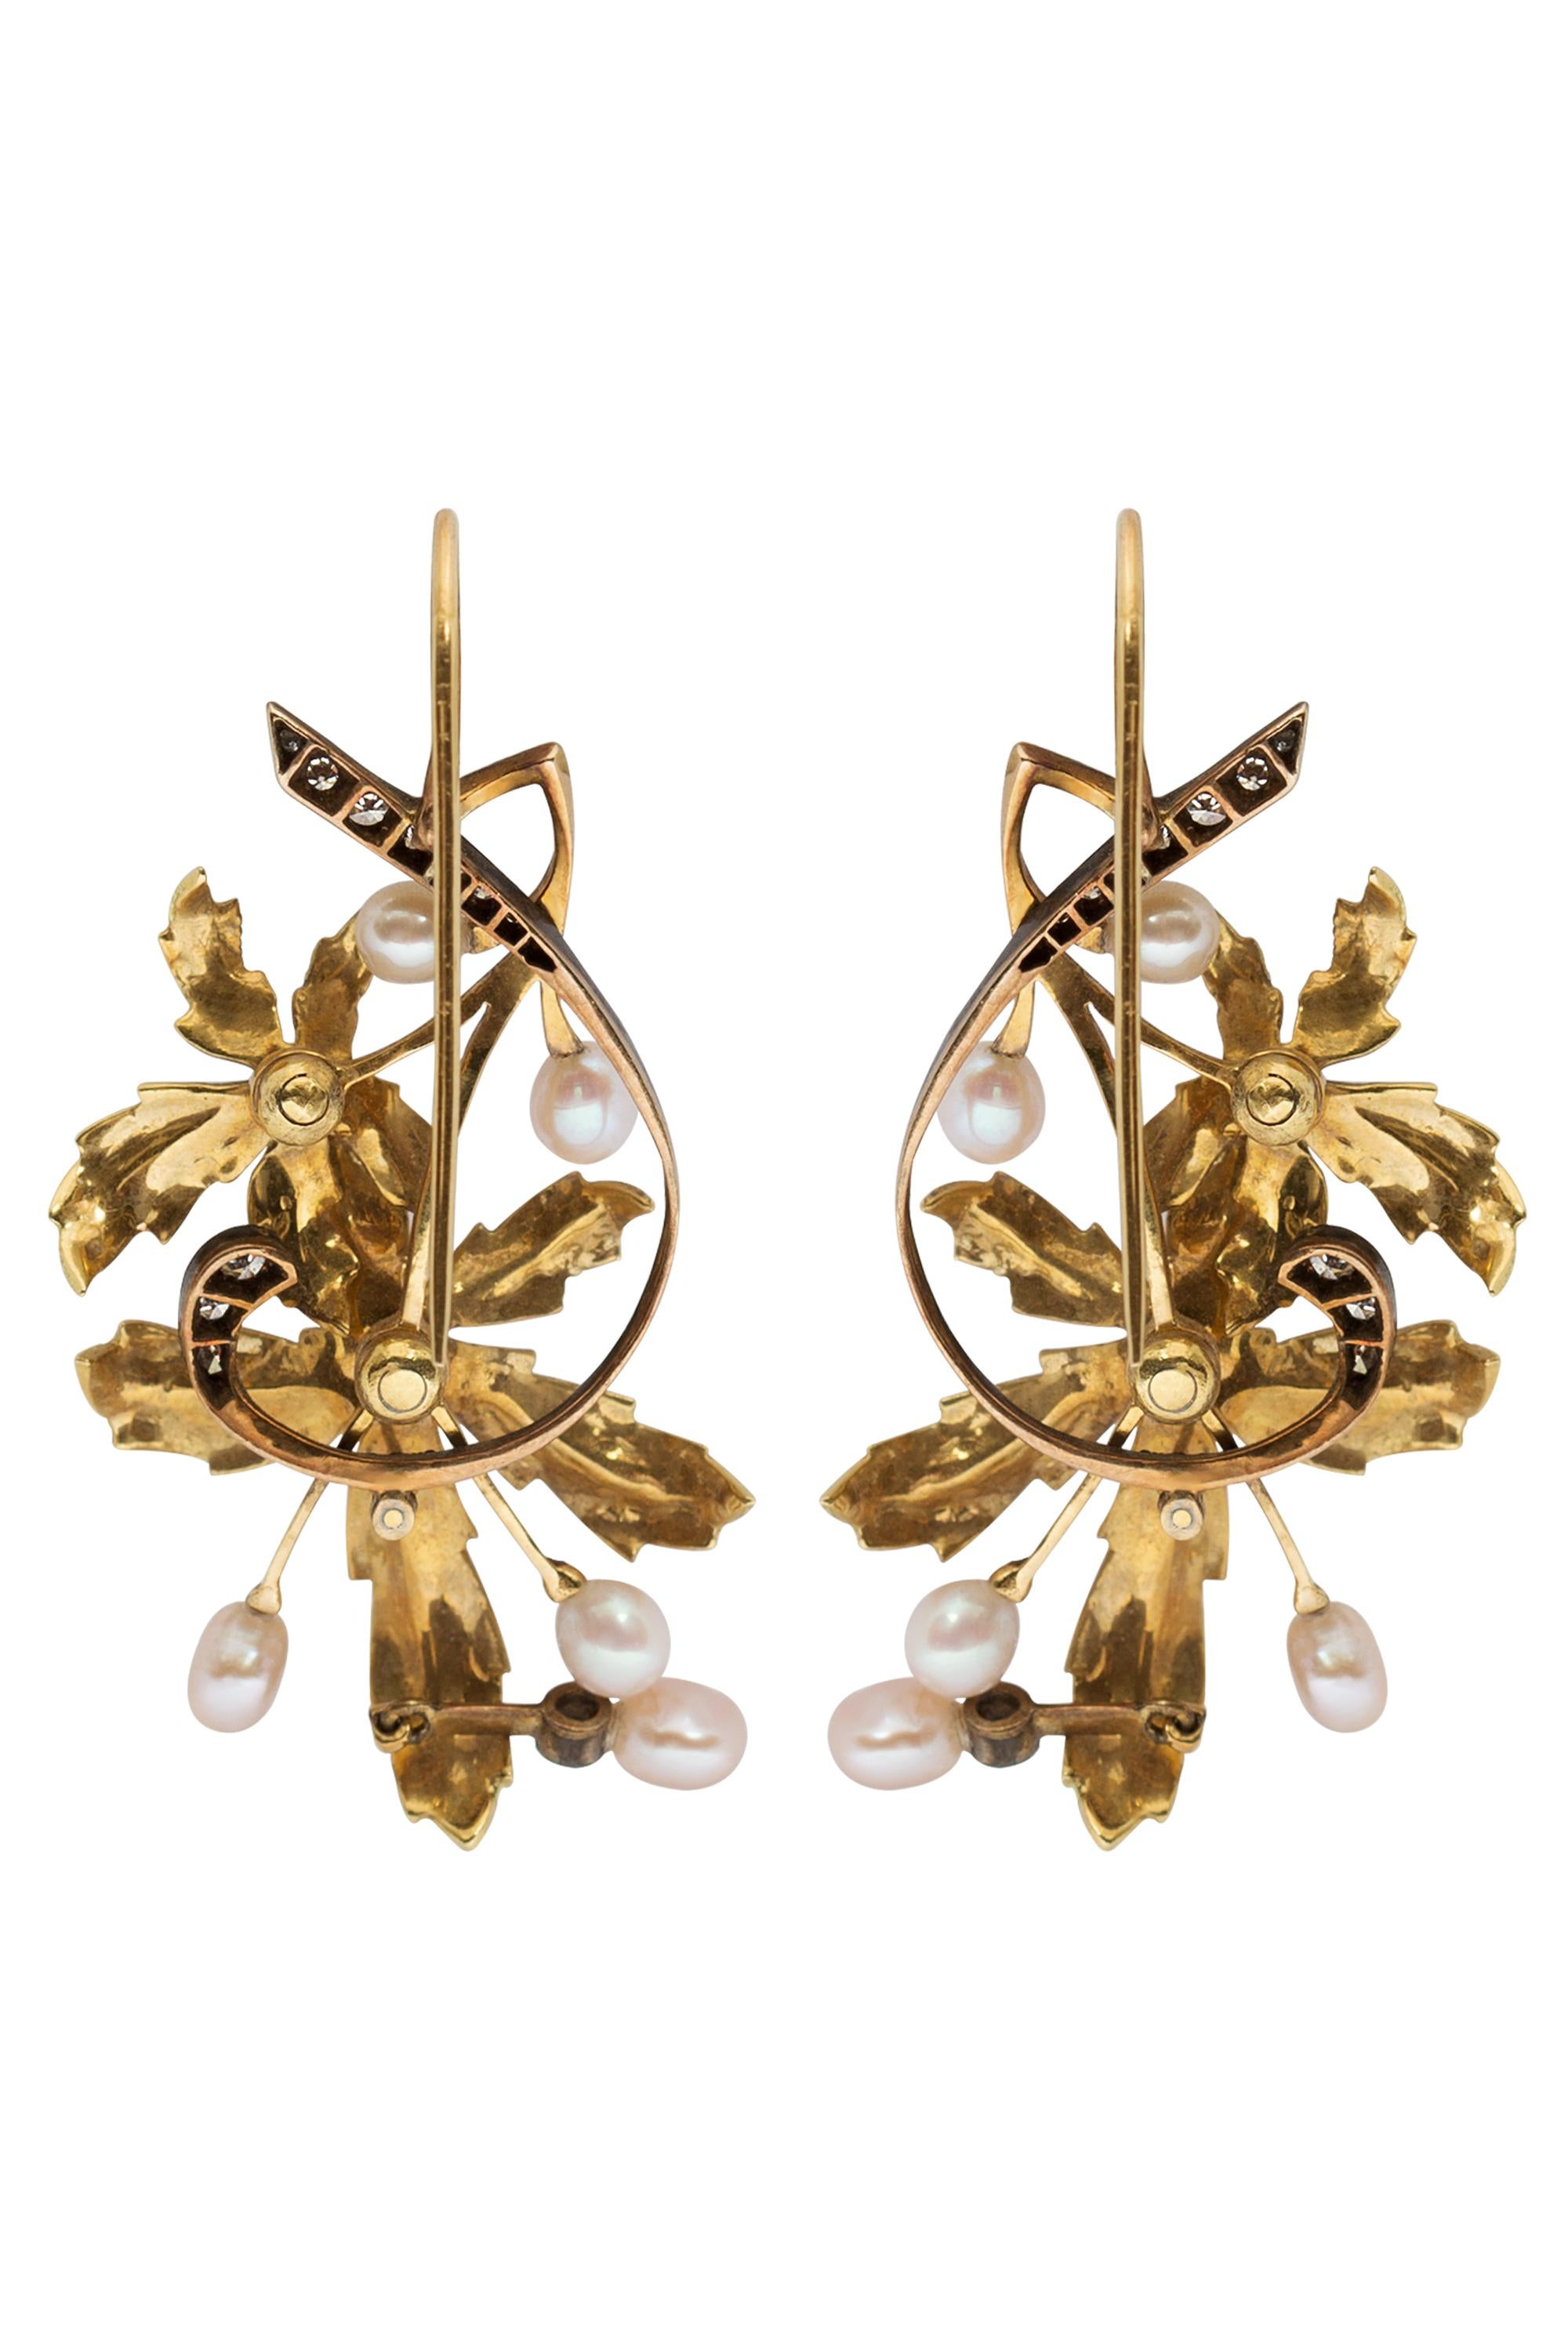 These delicate and graceful Art Nouveau earrings feature bright leaves of textured gold, sinuous curves of sparkling single cut diamonds set in delicate veins of blackened gold and a gentle cascade of luminous freshwater pearls. The incomparable